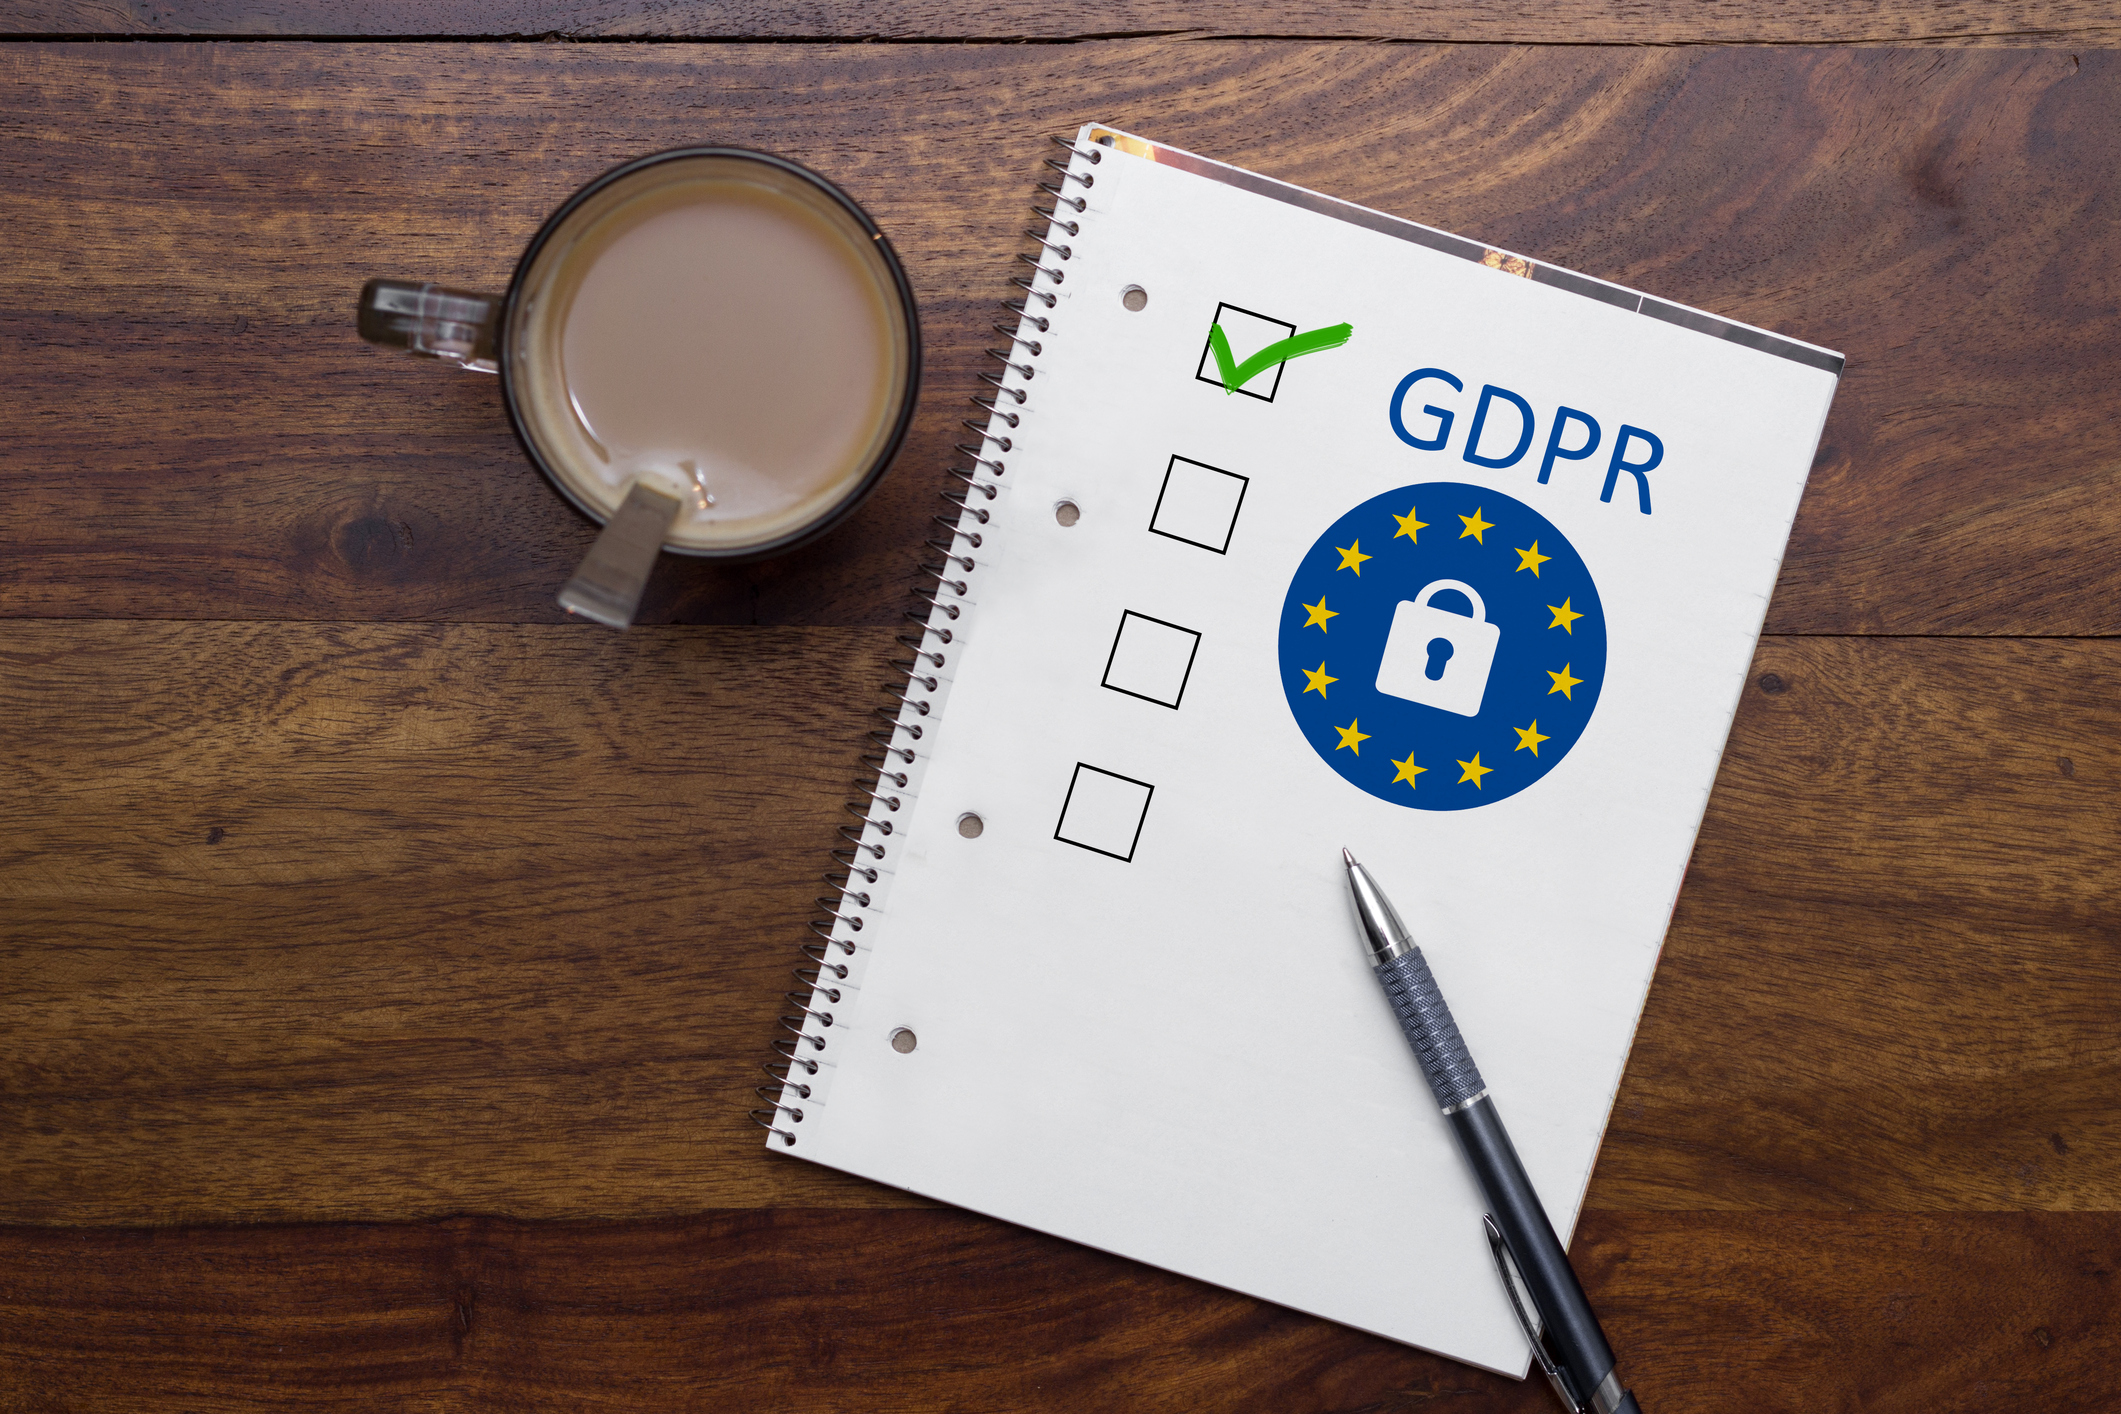  GDPR Compliance is supposed to be achieved by May 25, 2018 